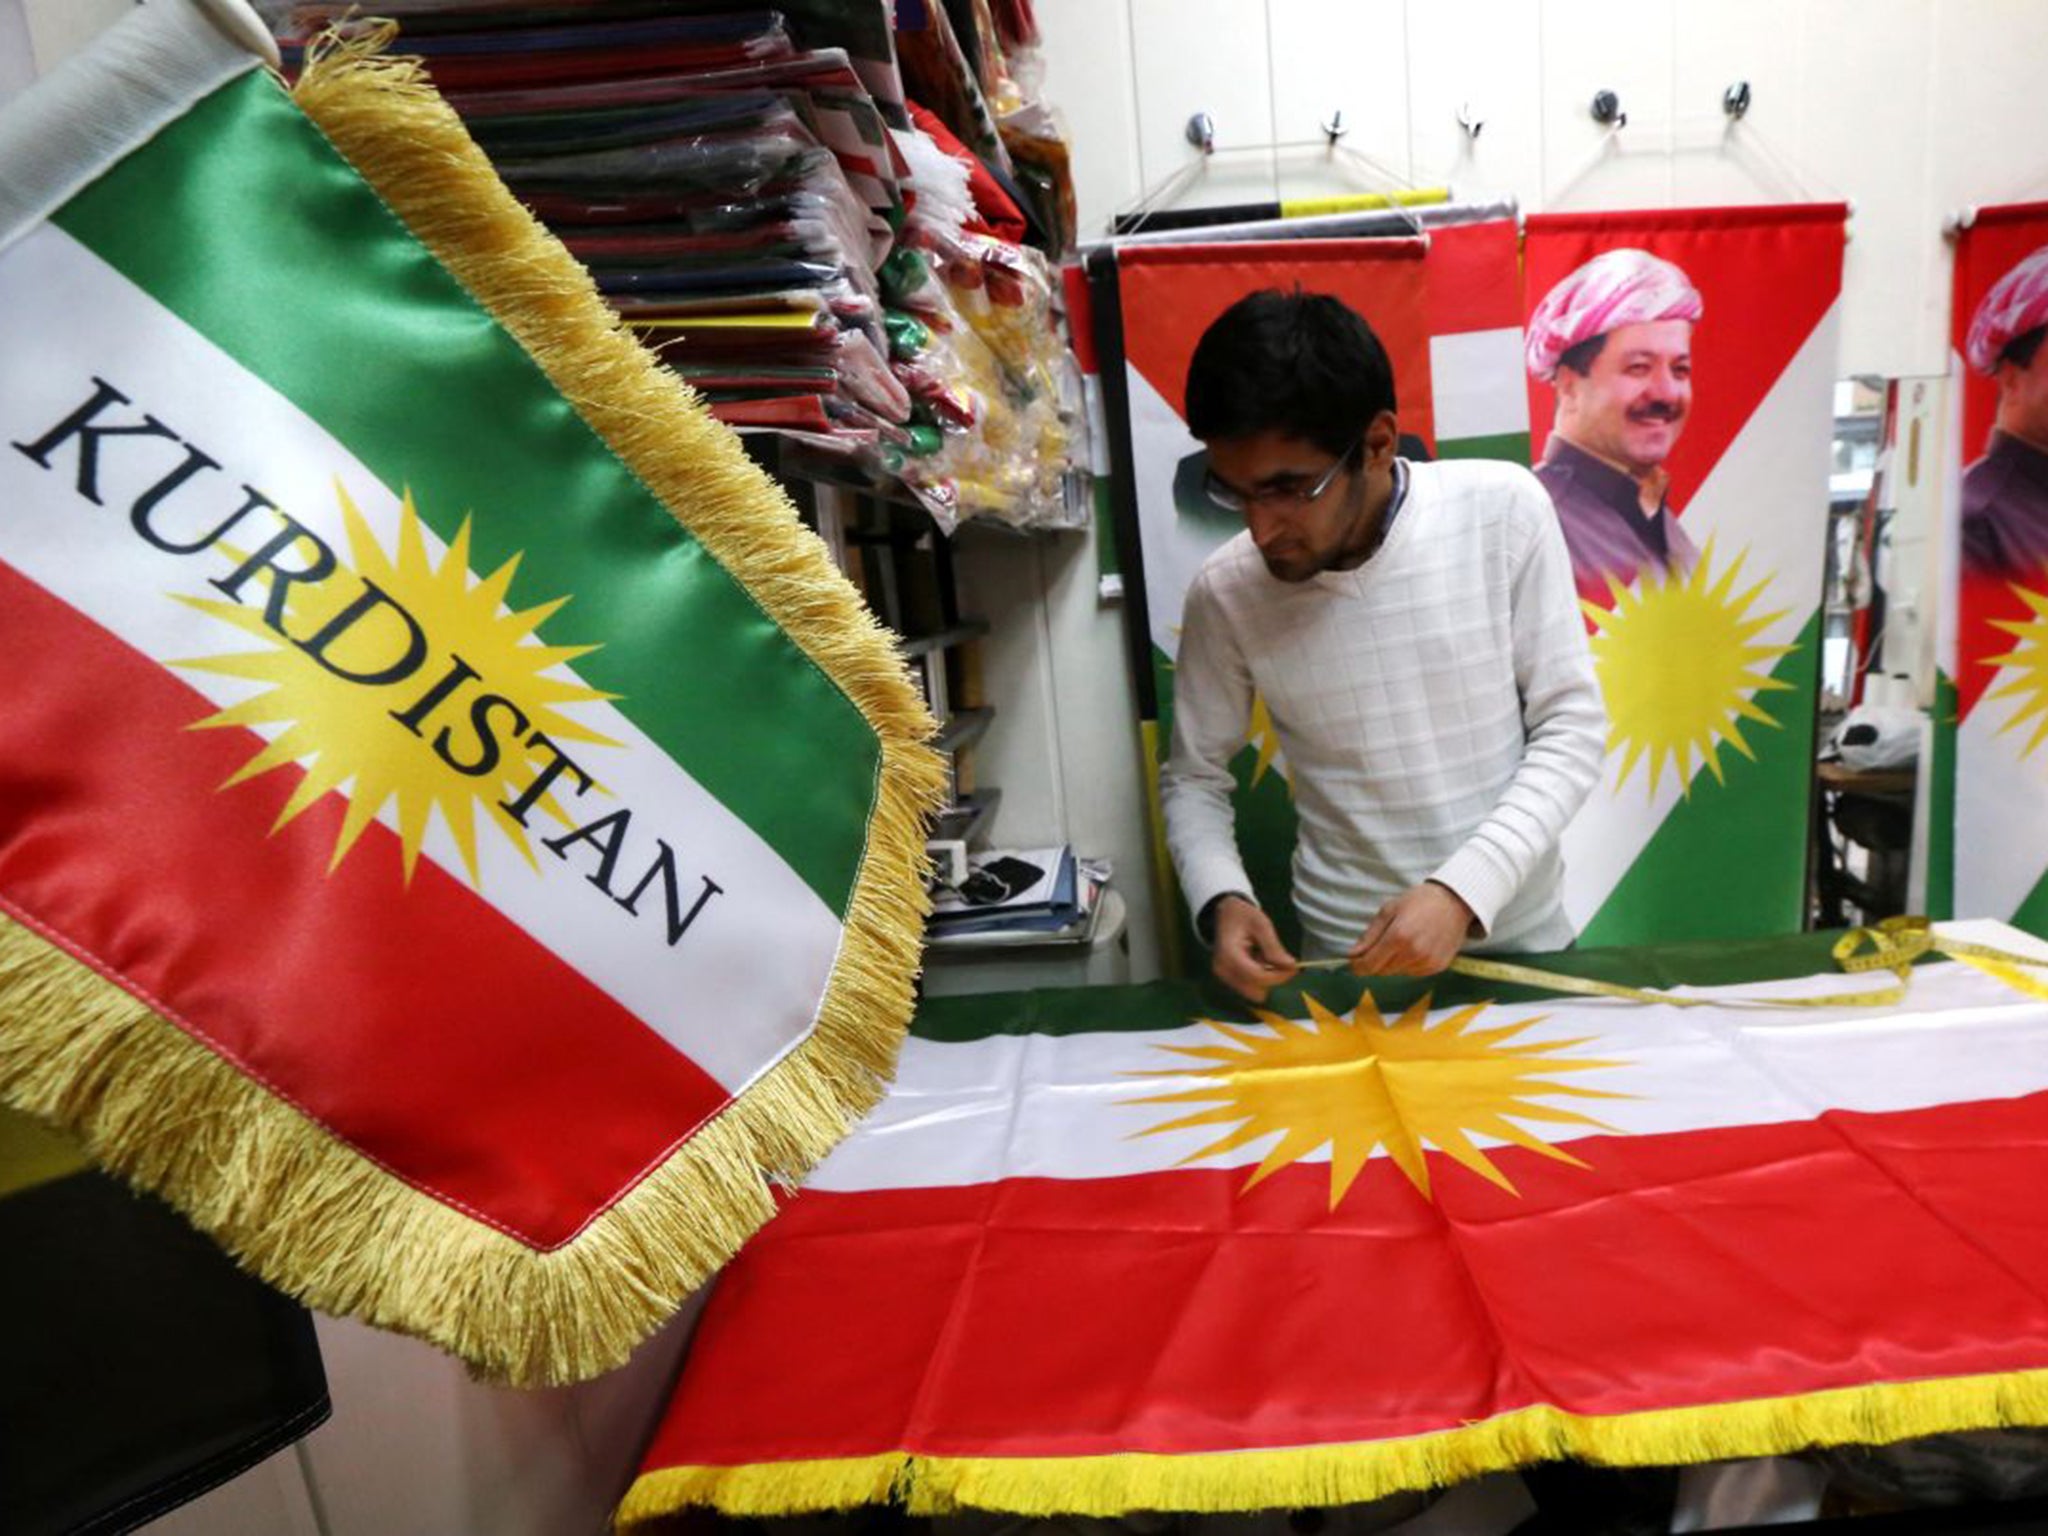 ‘The Kurds are Turkey’s enemy – just as they always were’